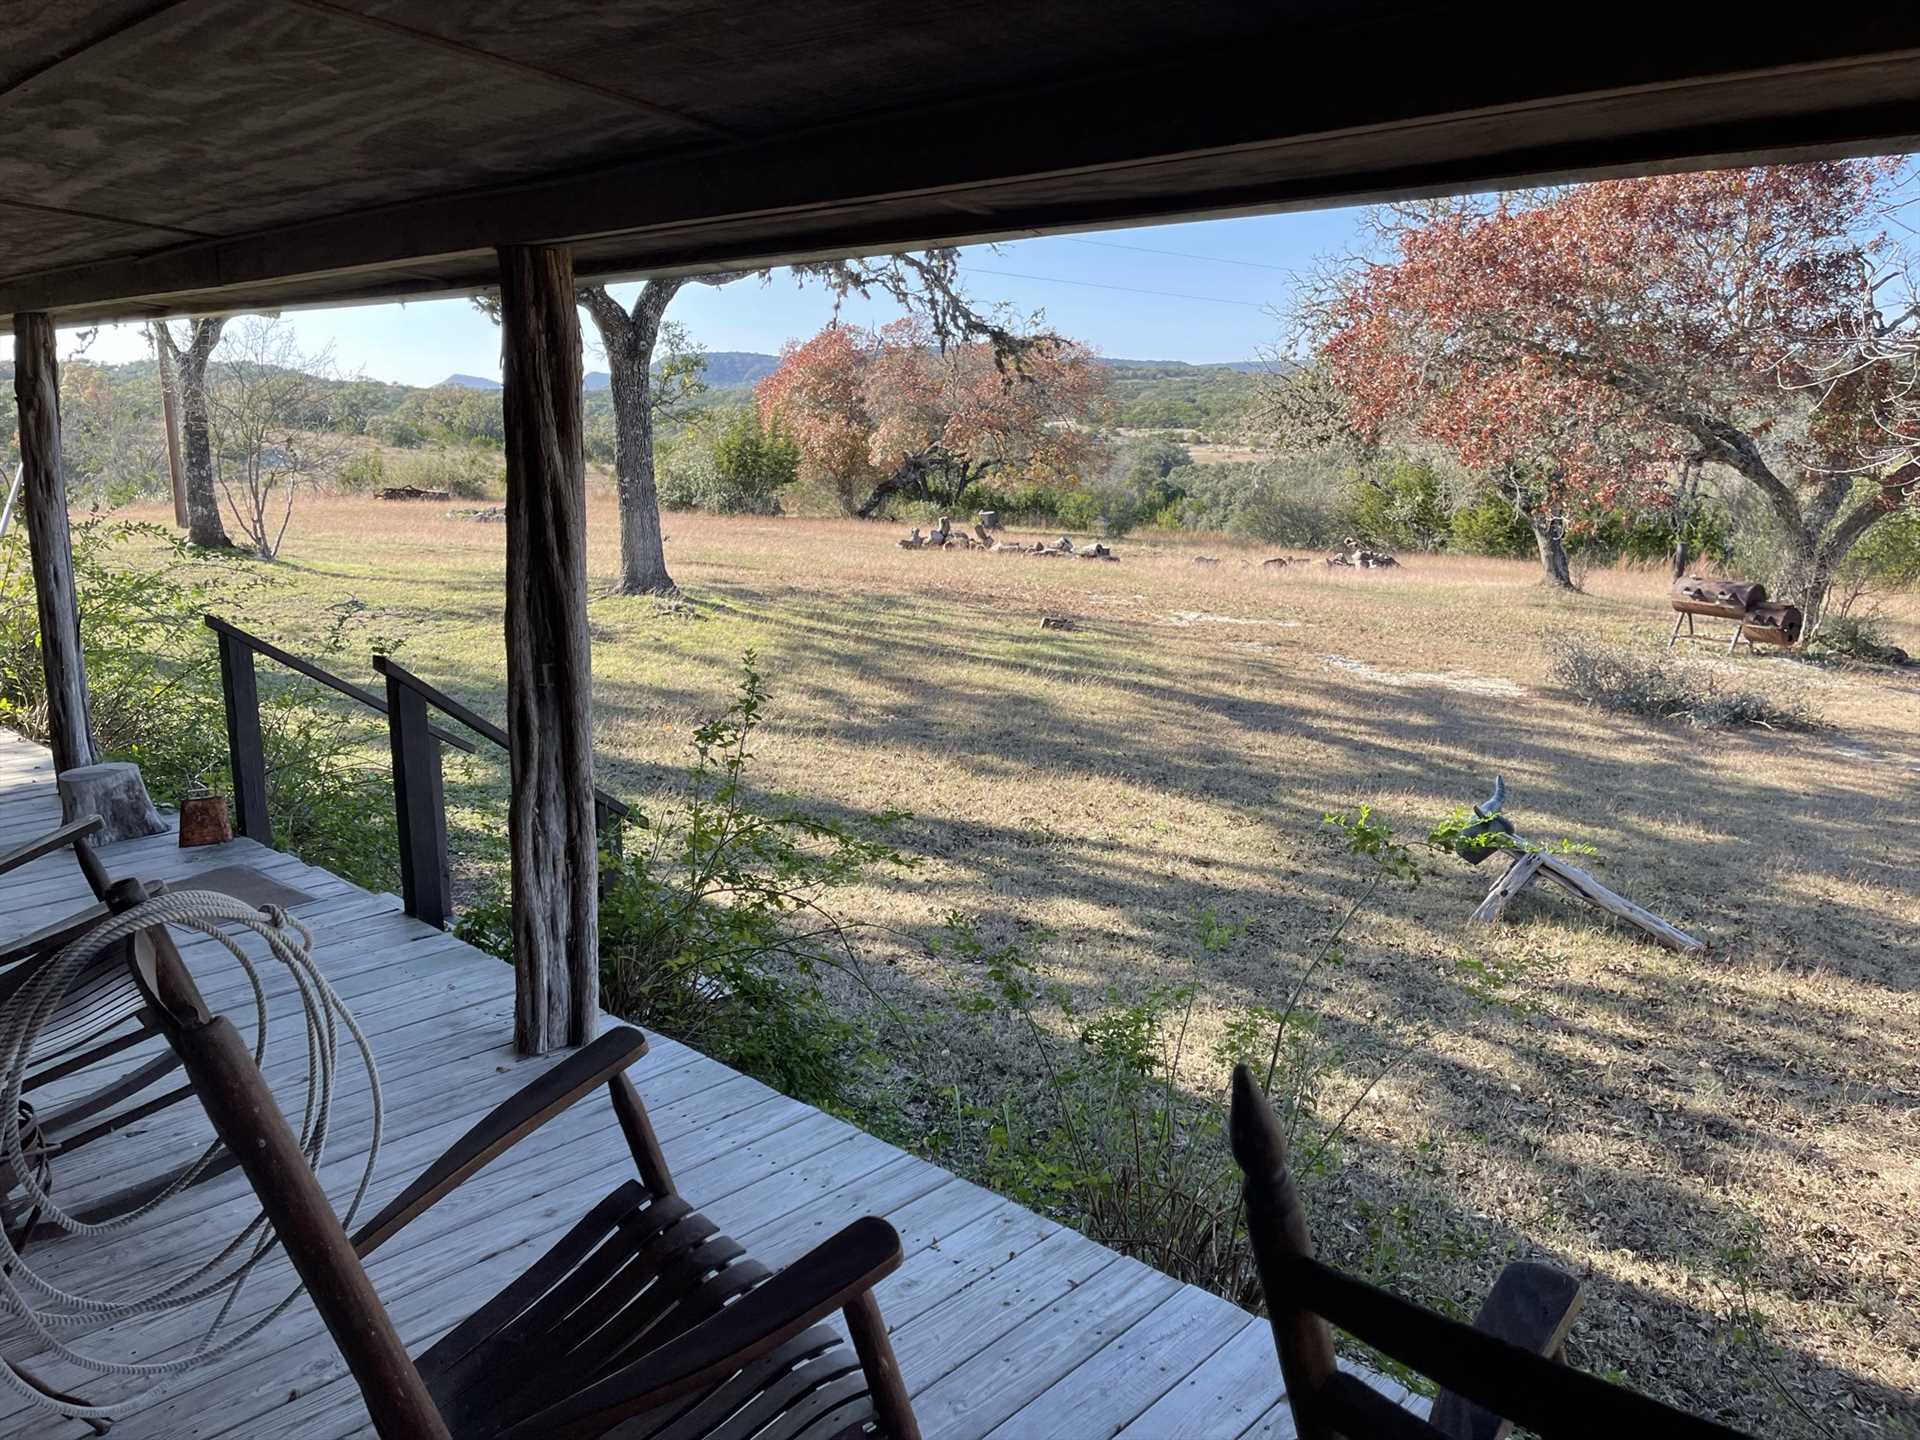                                                 Rock a few quiet moments away on the Lodge's shaded deck, complete with stunning views of the rolling Hill Country.